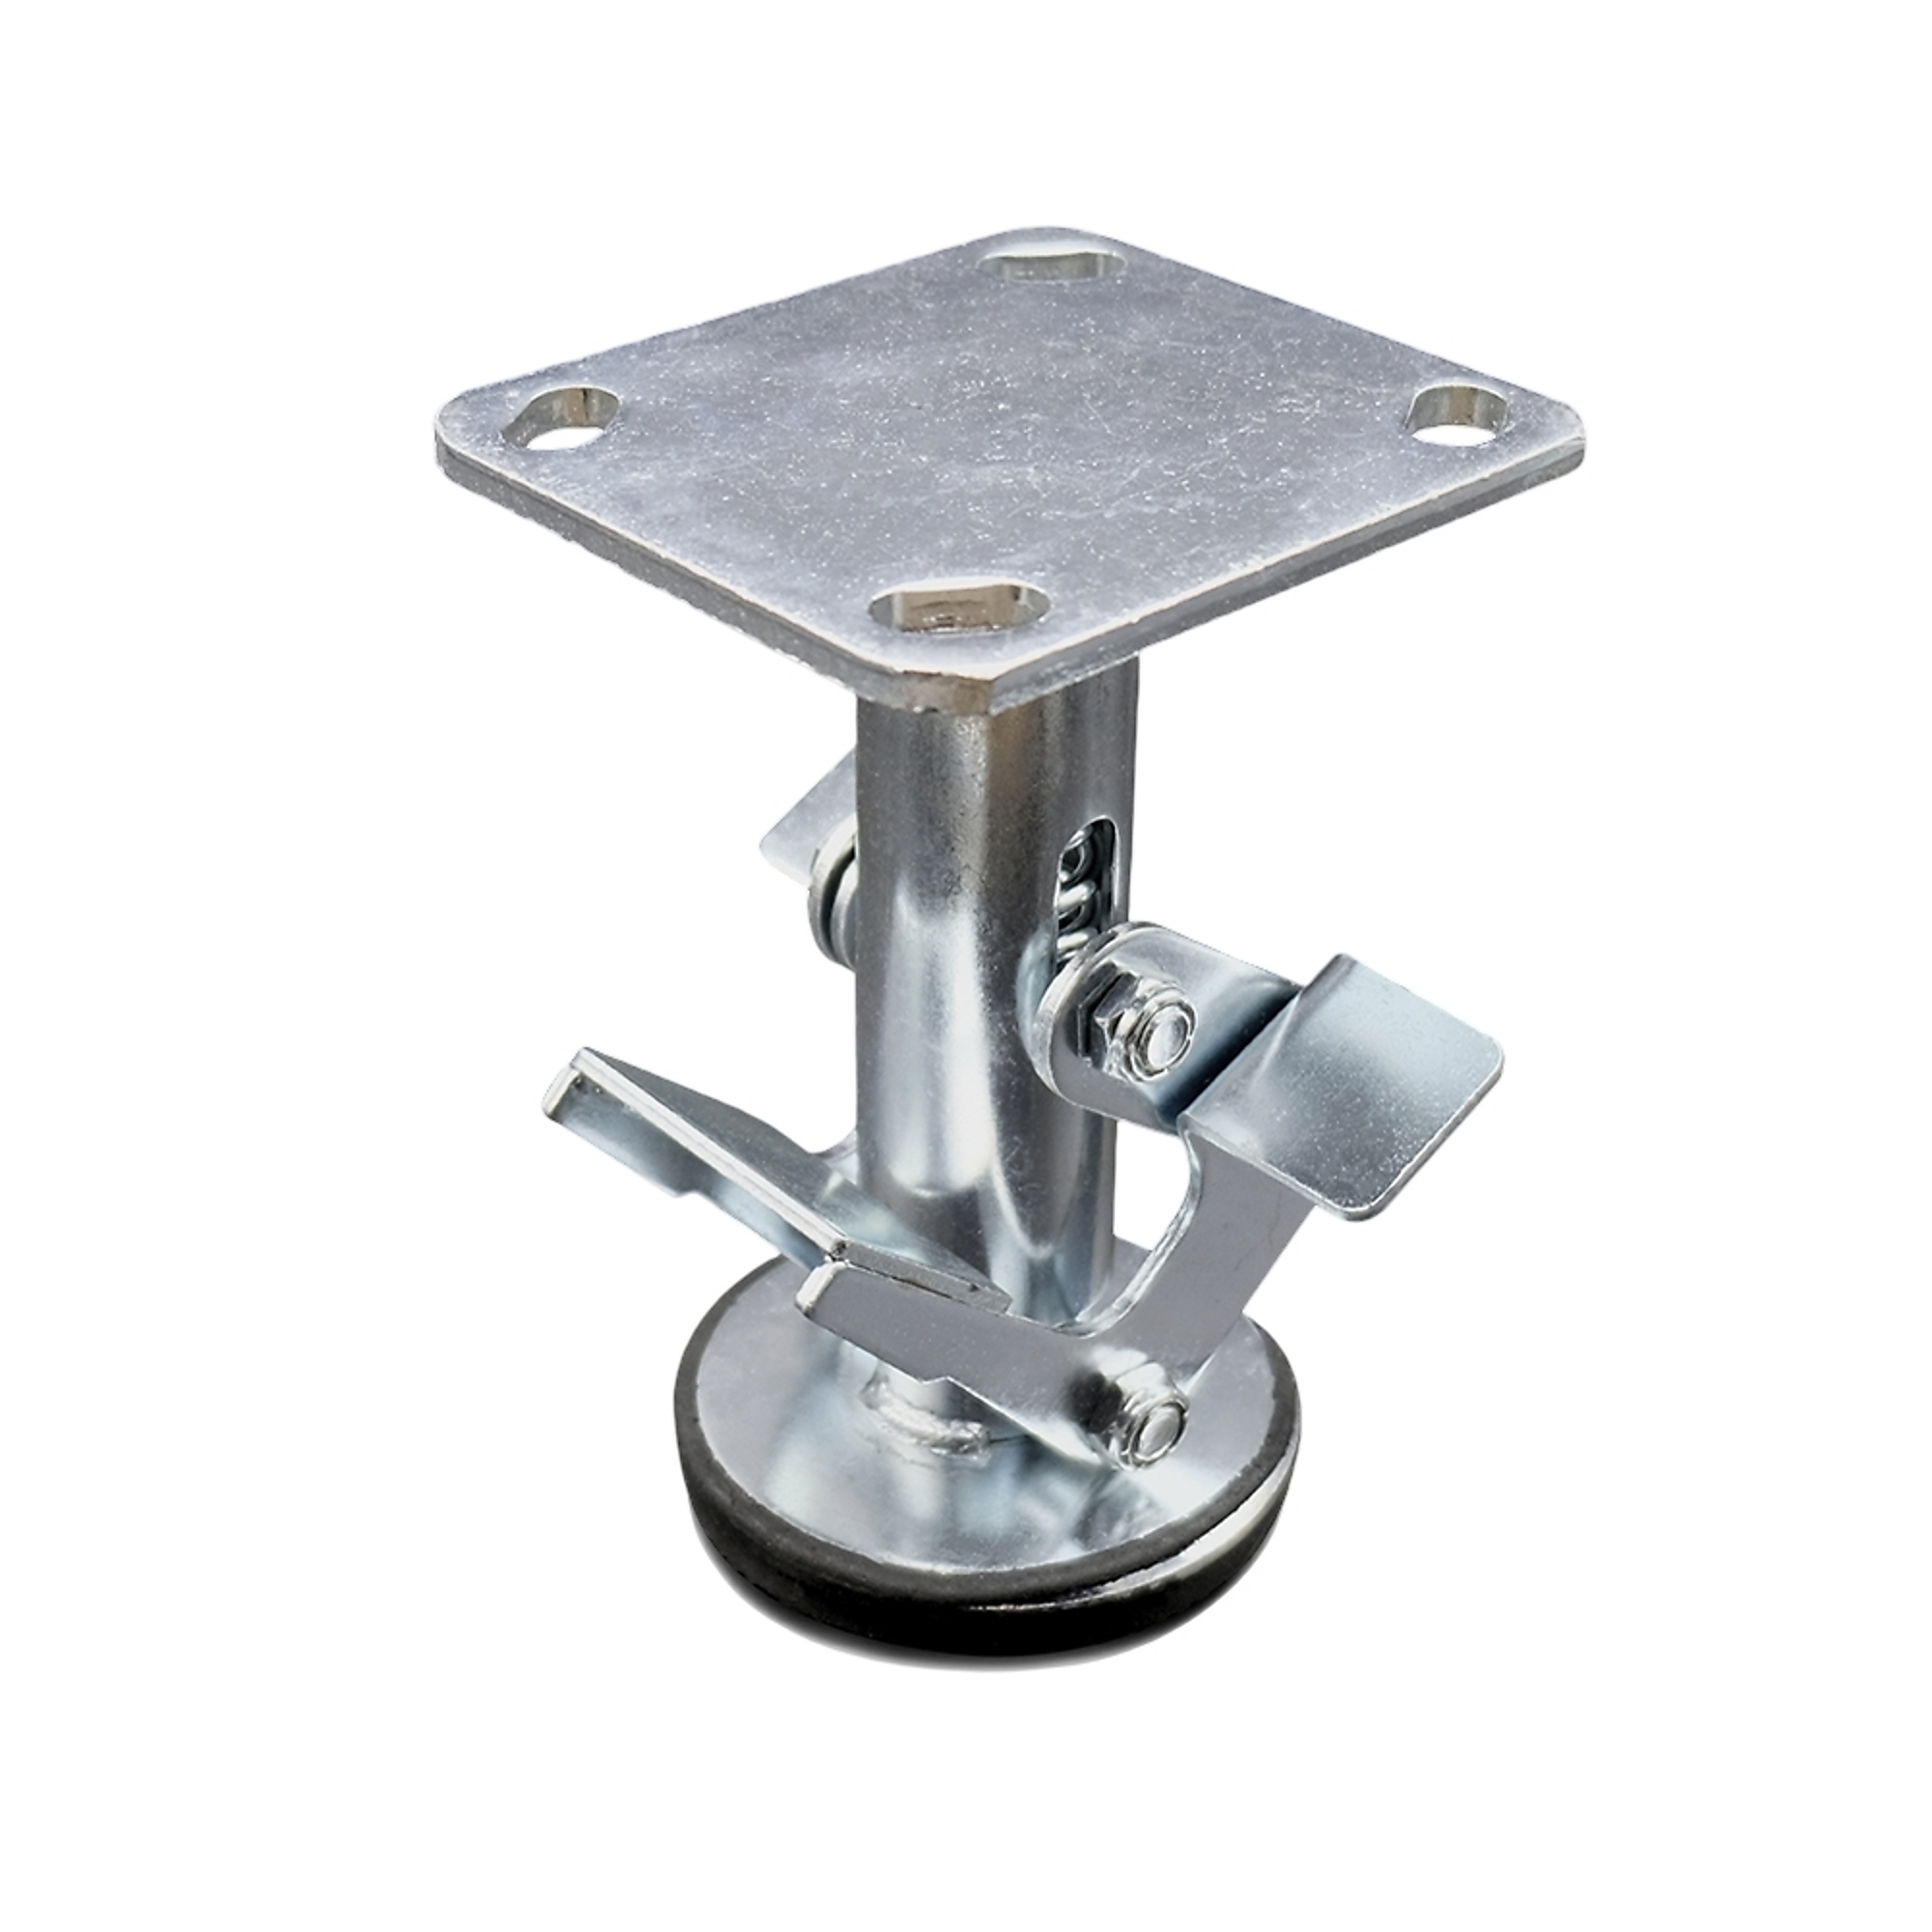 Service Caster, 6Inch Double Pedal Floor Truck Lock, Caster Type Rigid, Package (qty.) 1, Model SCC-FL600DP